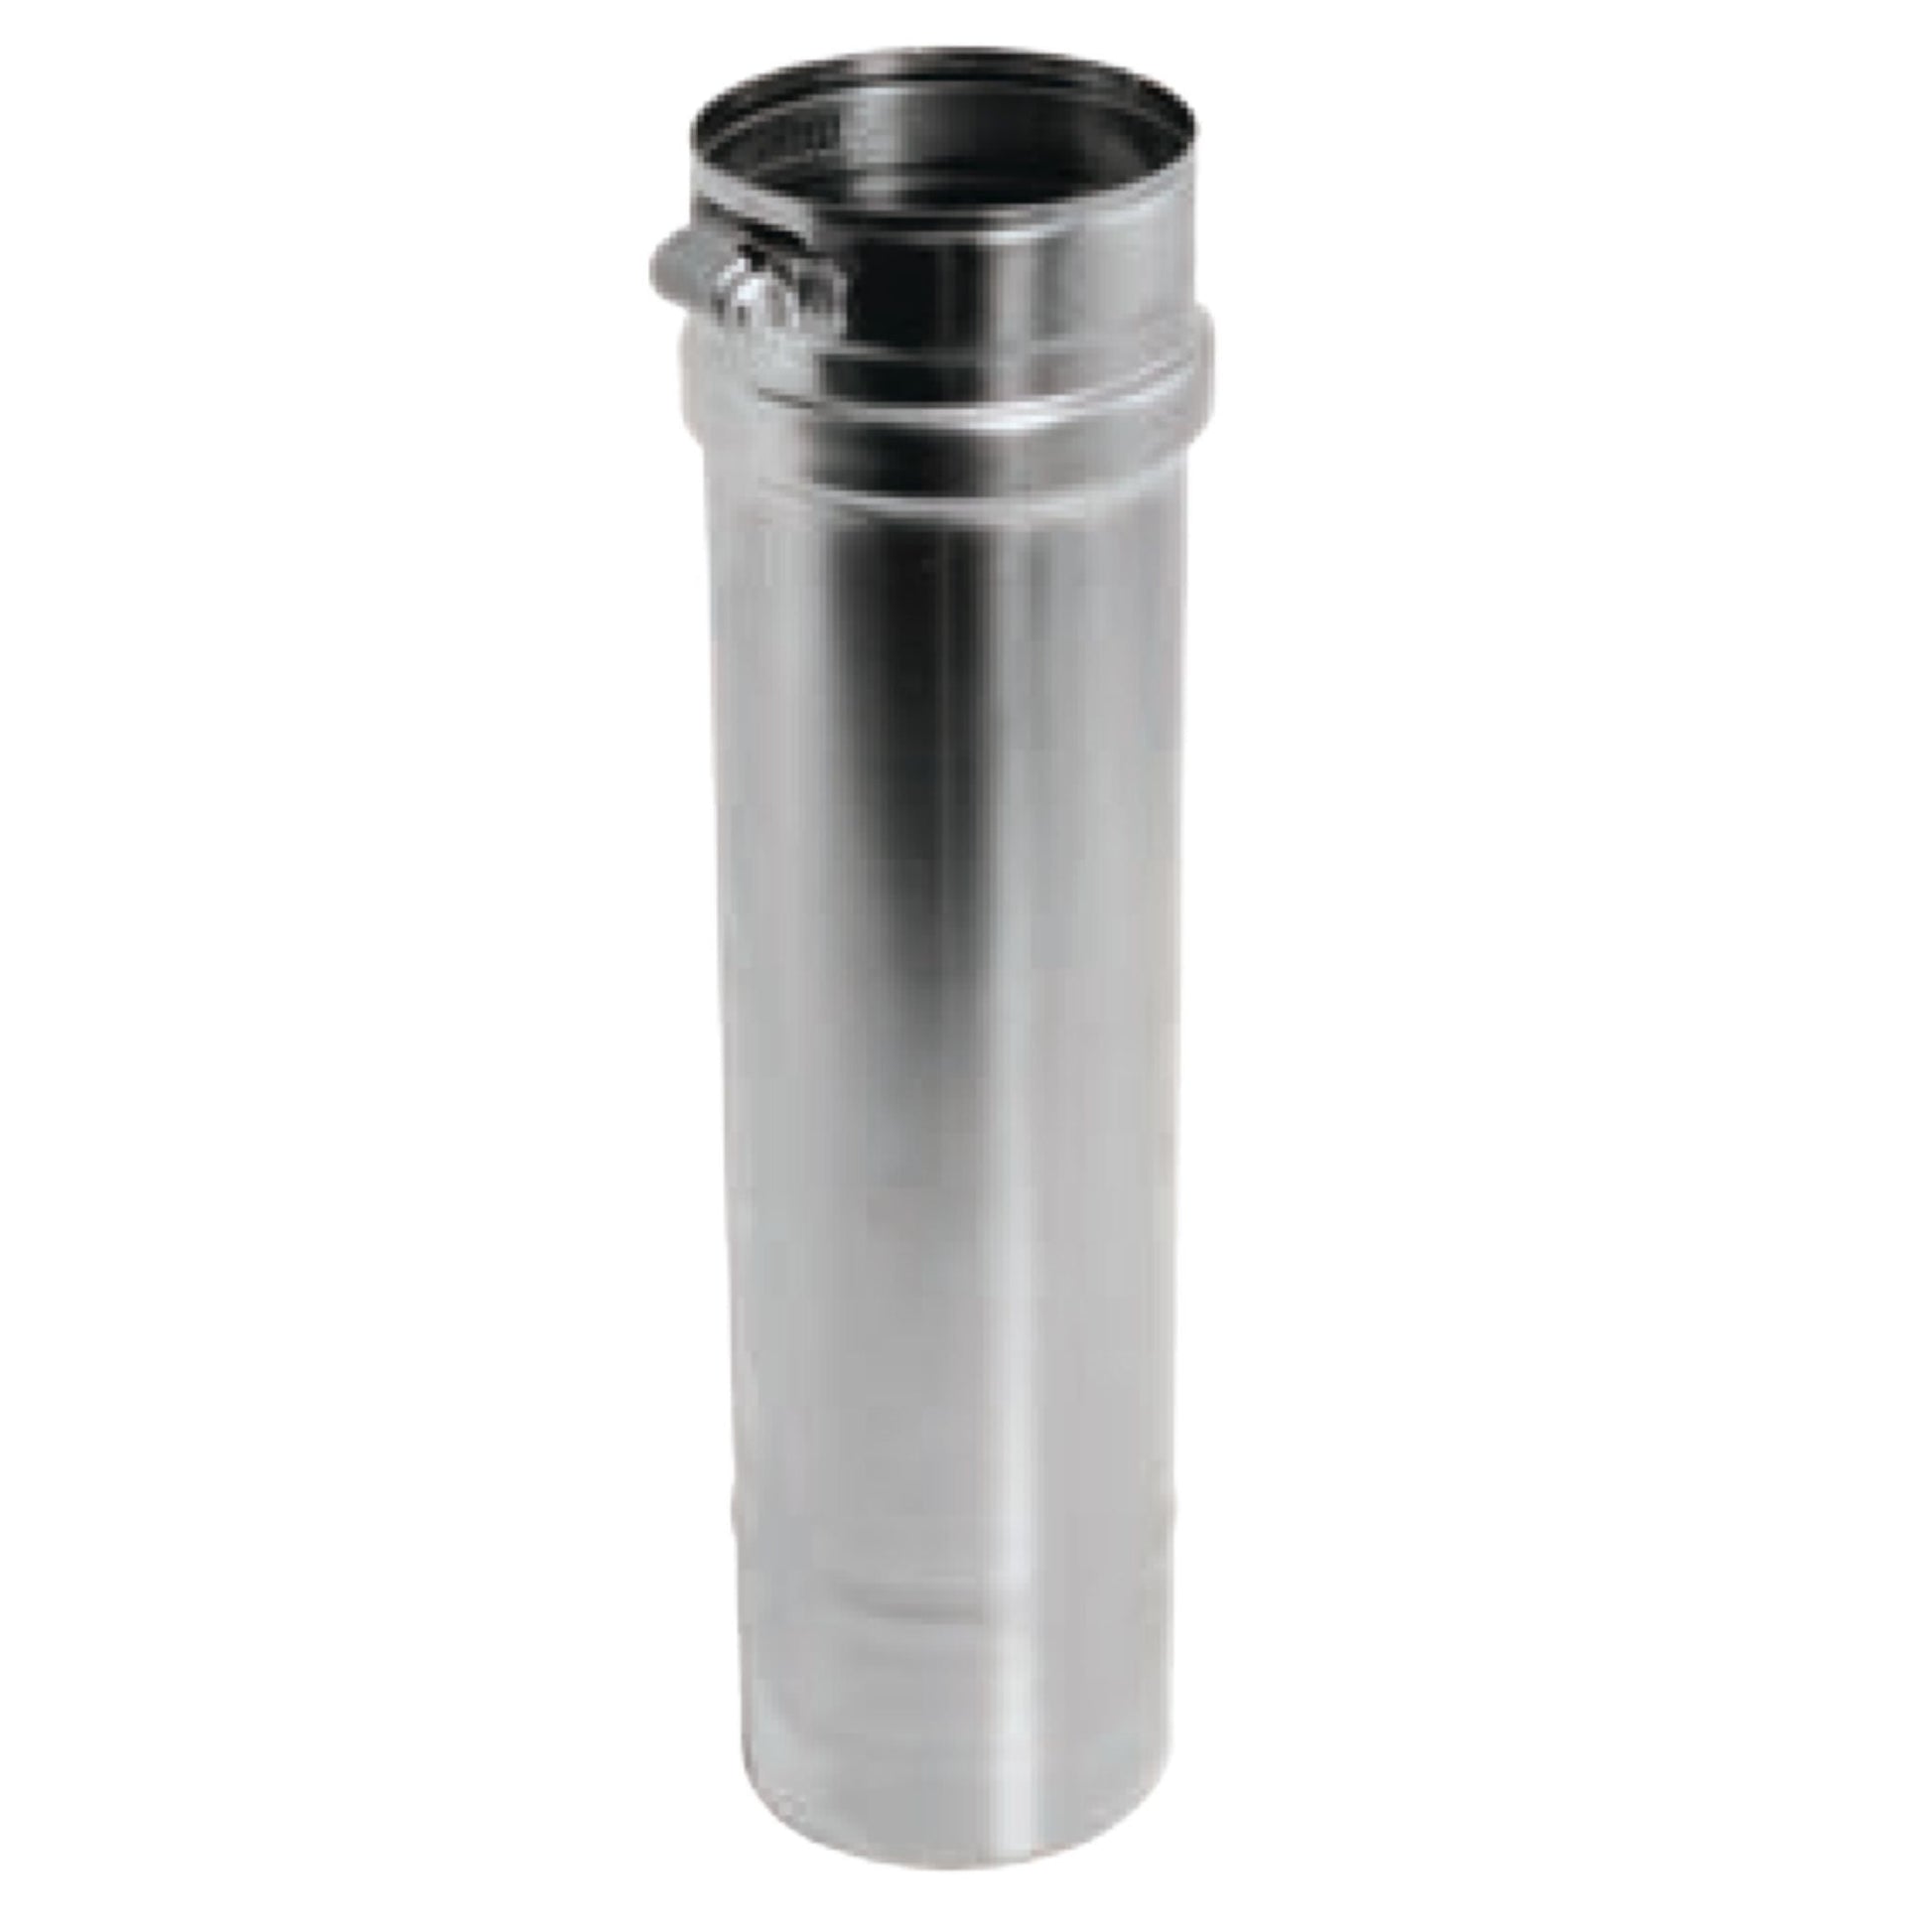 DuraVent FasNSeal 3" x 6" 29-4C Stainless Steel Vent Length